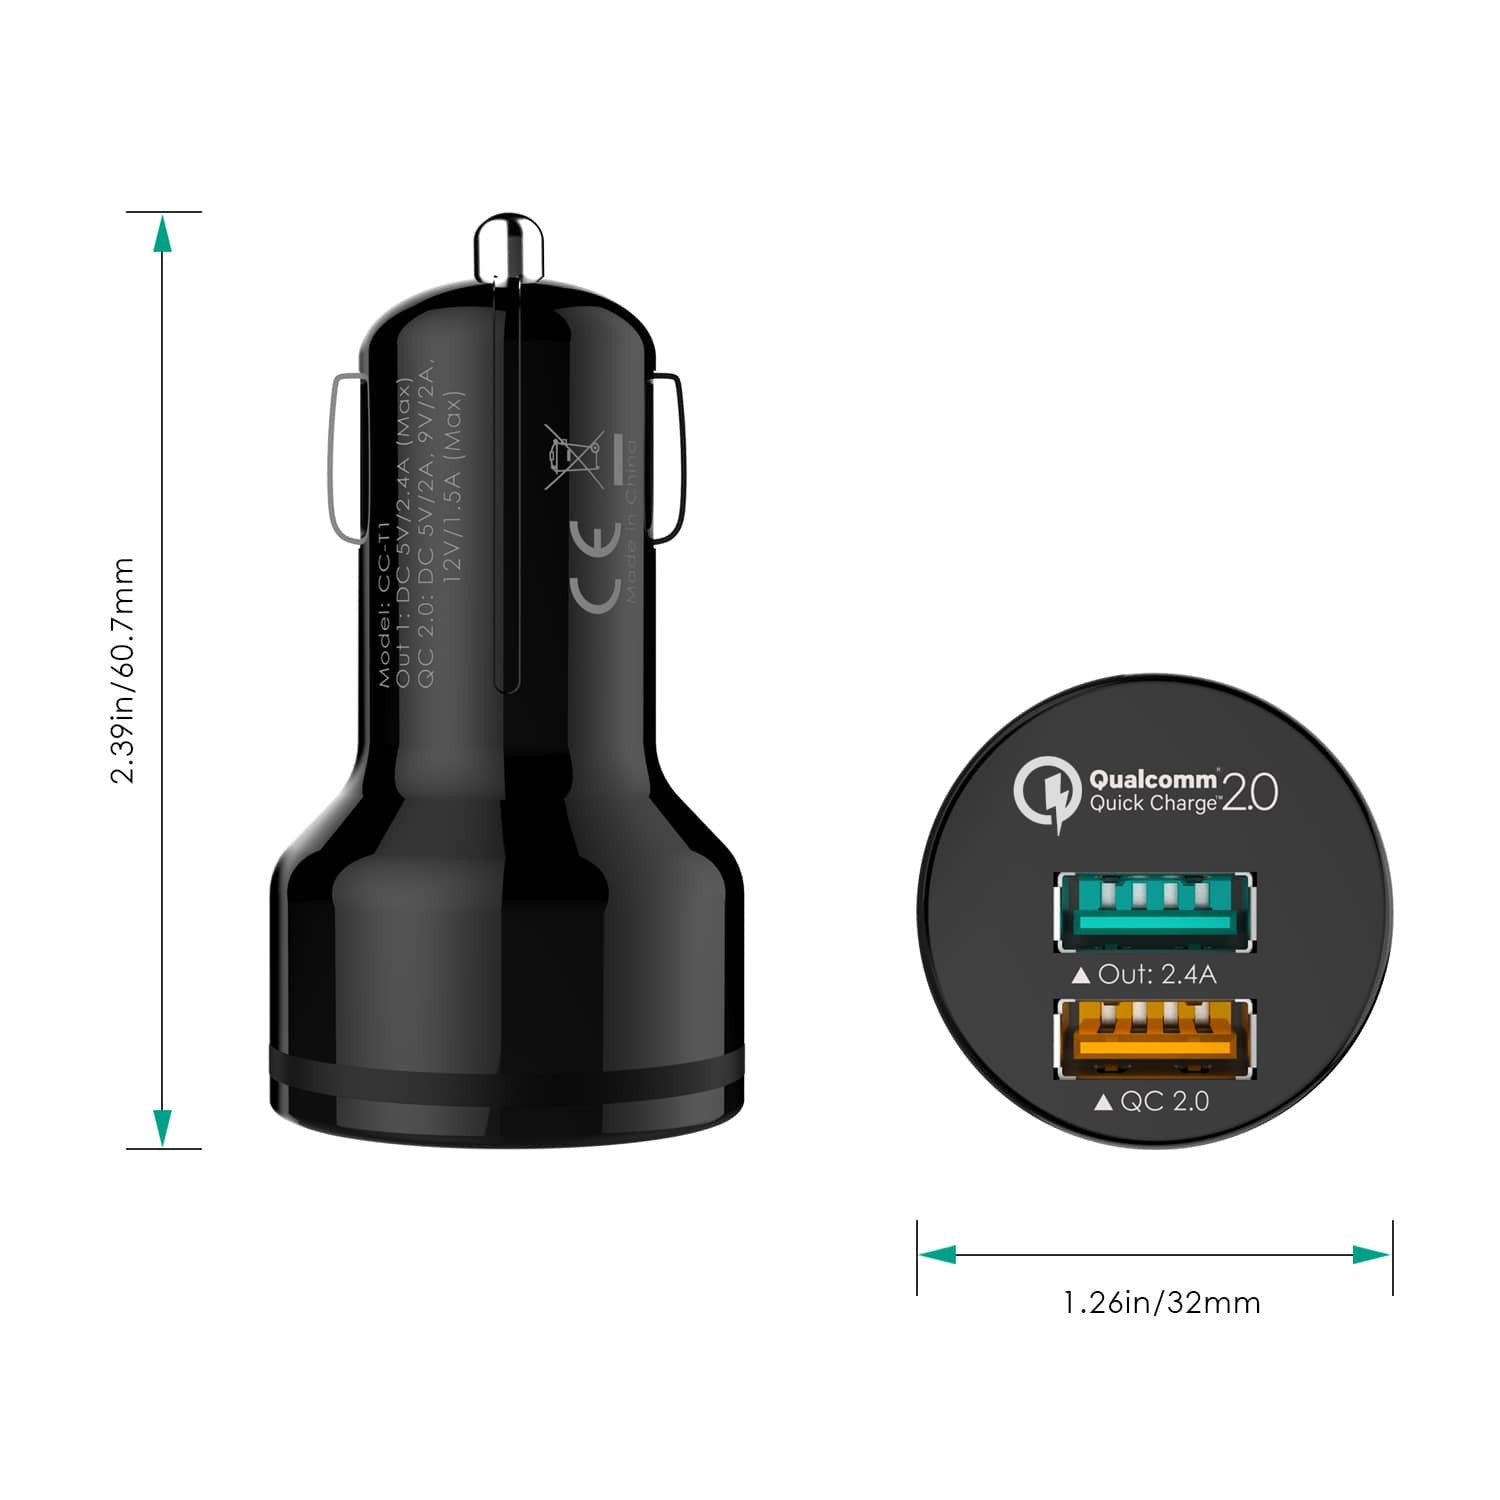 AUKEY CC-T1 Qualcomm Quick Charge 2.0 30W 2 Port USB Car Charger - Aukey Malaysia Official Store